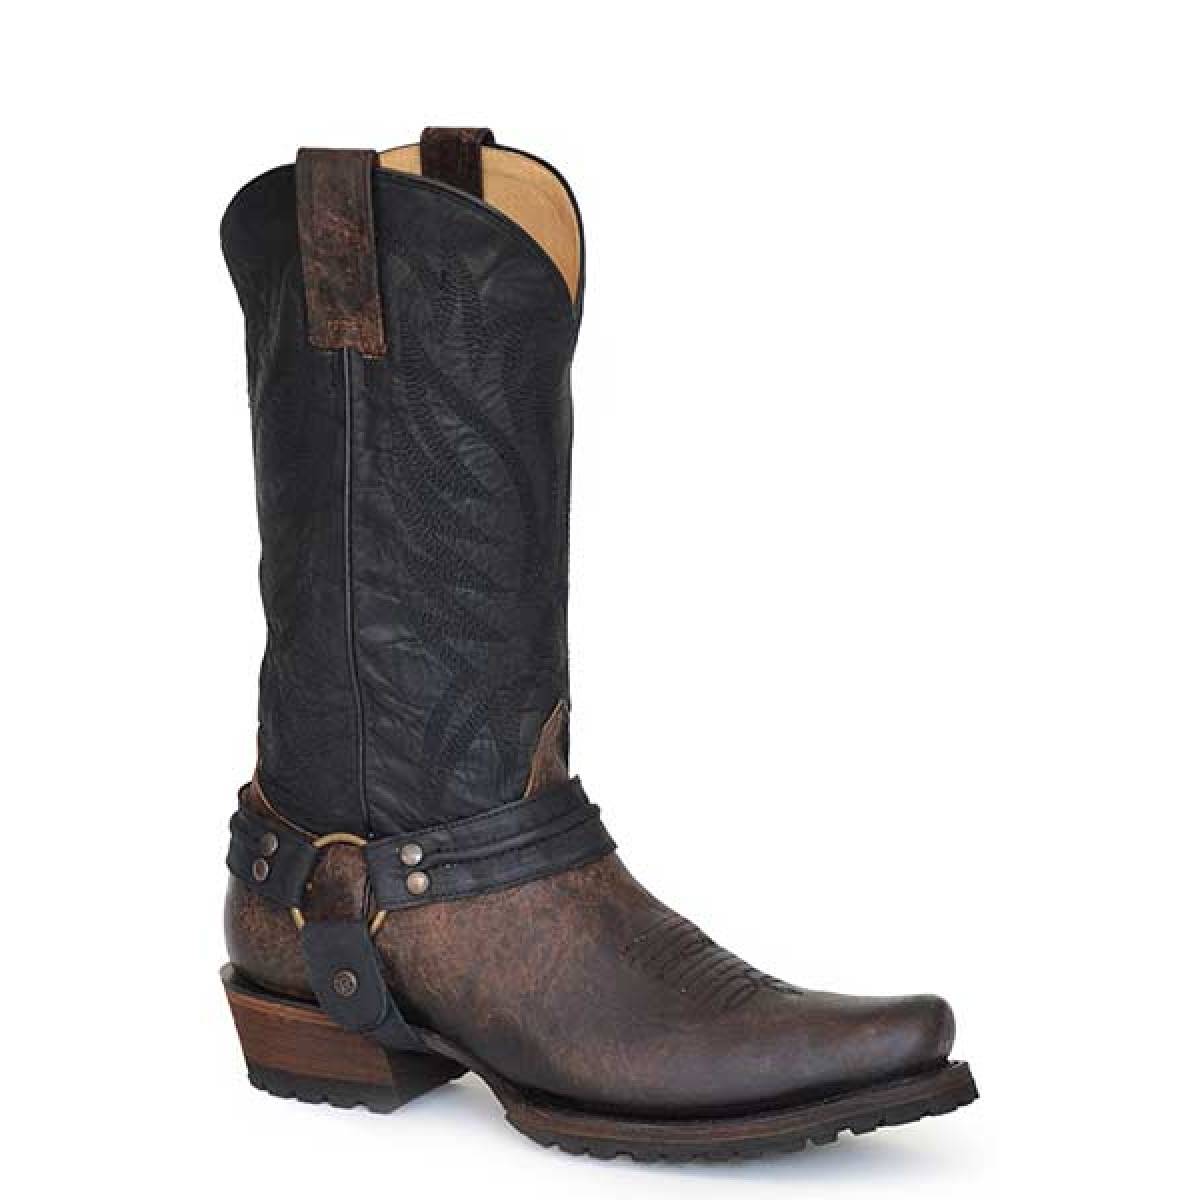 Men's Roper Desert Sand Harness Leather Lug Sole Boots Handcrafted Brown - yeehawcowboy